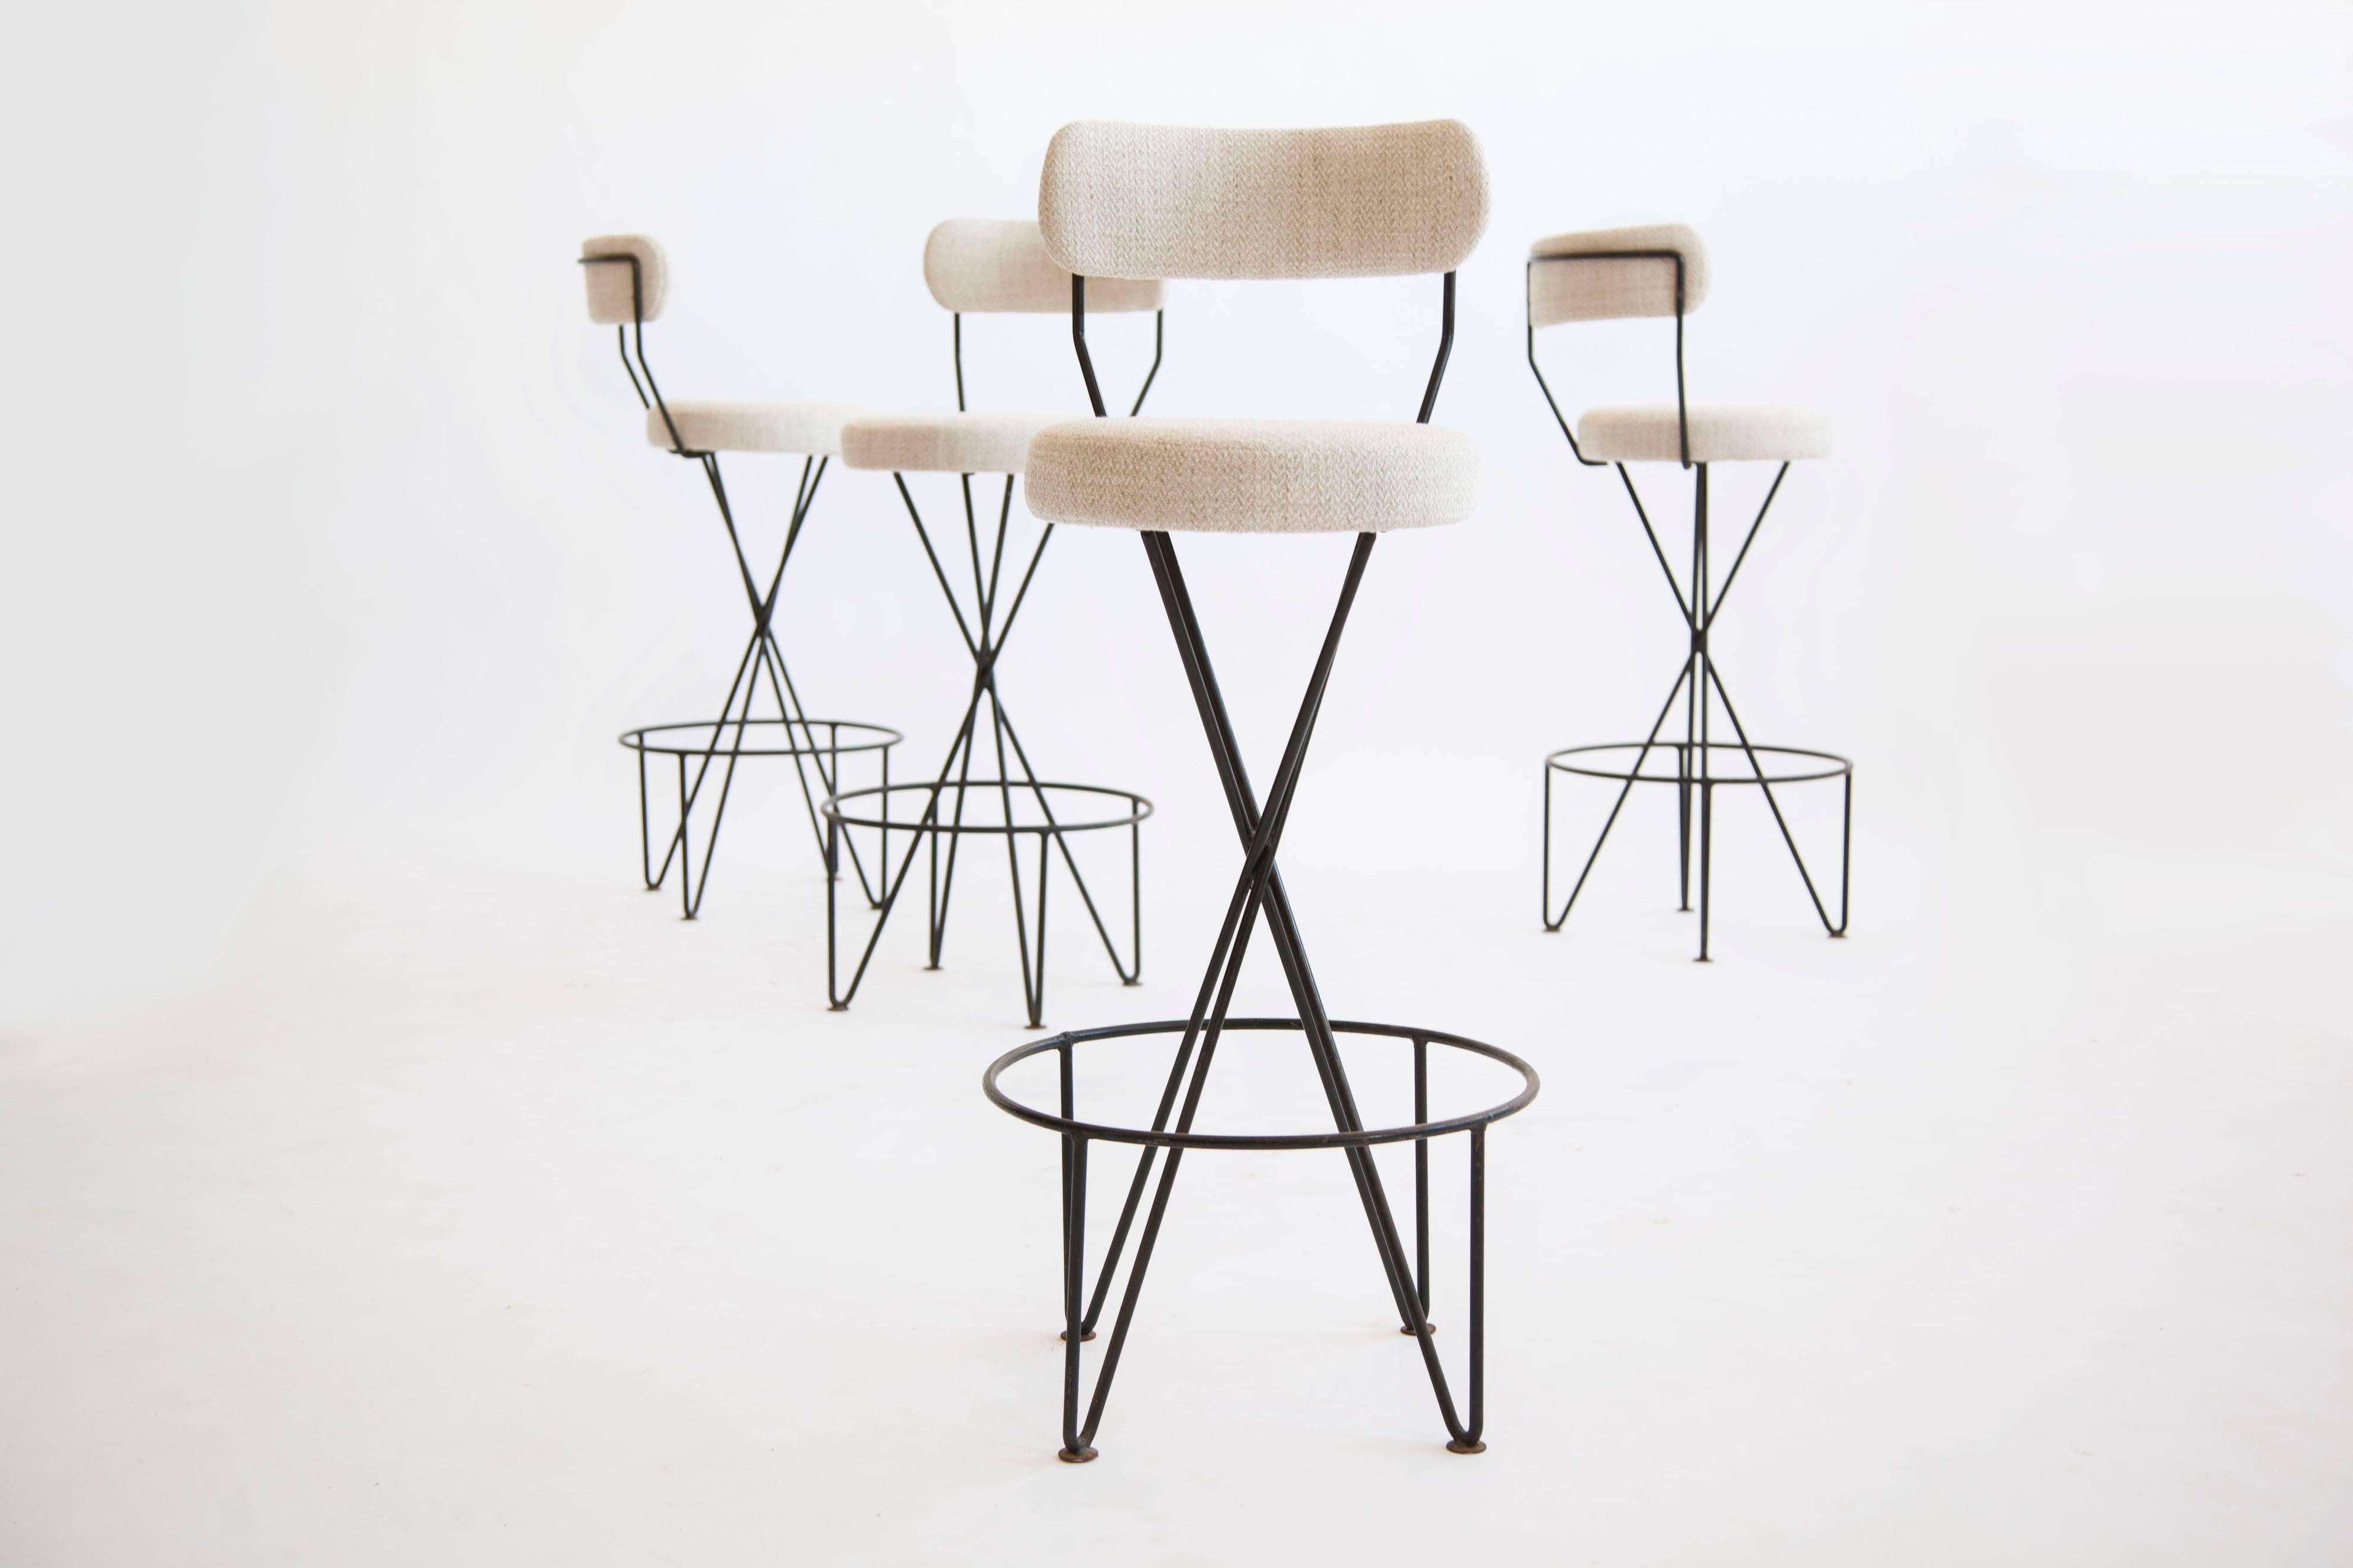 Tony Paul wrought iron and upholstered bar stools.
Reupholstered with woven cotton seats.